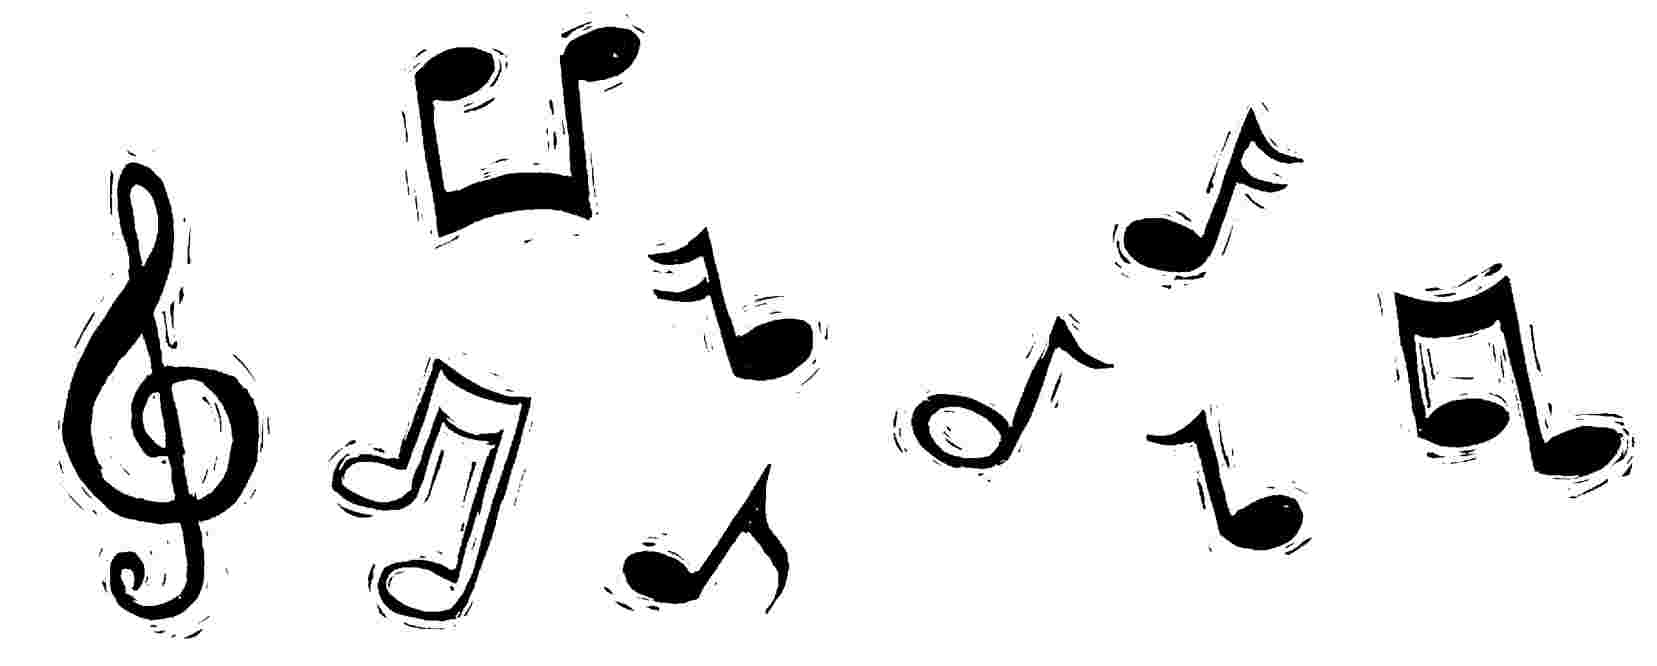 Png Hd Musical Notes Symbols - Cool Music Note Symbol Hd Pictures 4 Hd Wallpapers | Lzamgs., Transparent background PNG HD thumbnail